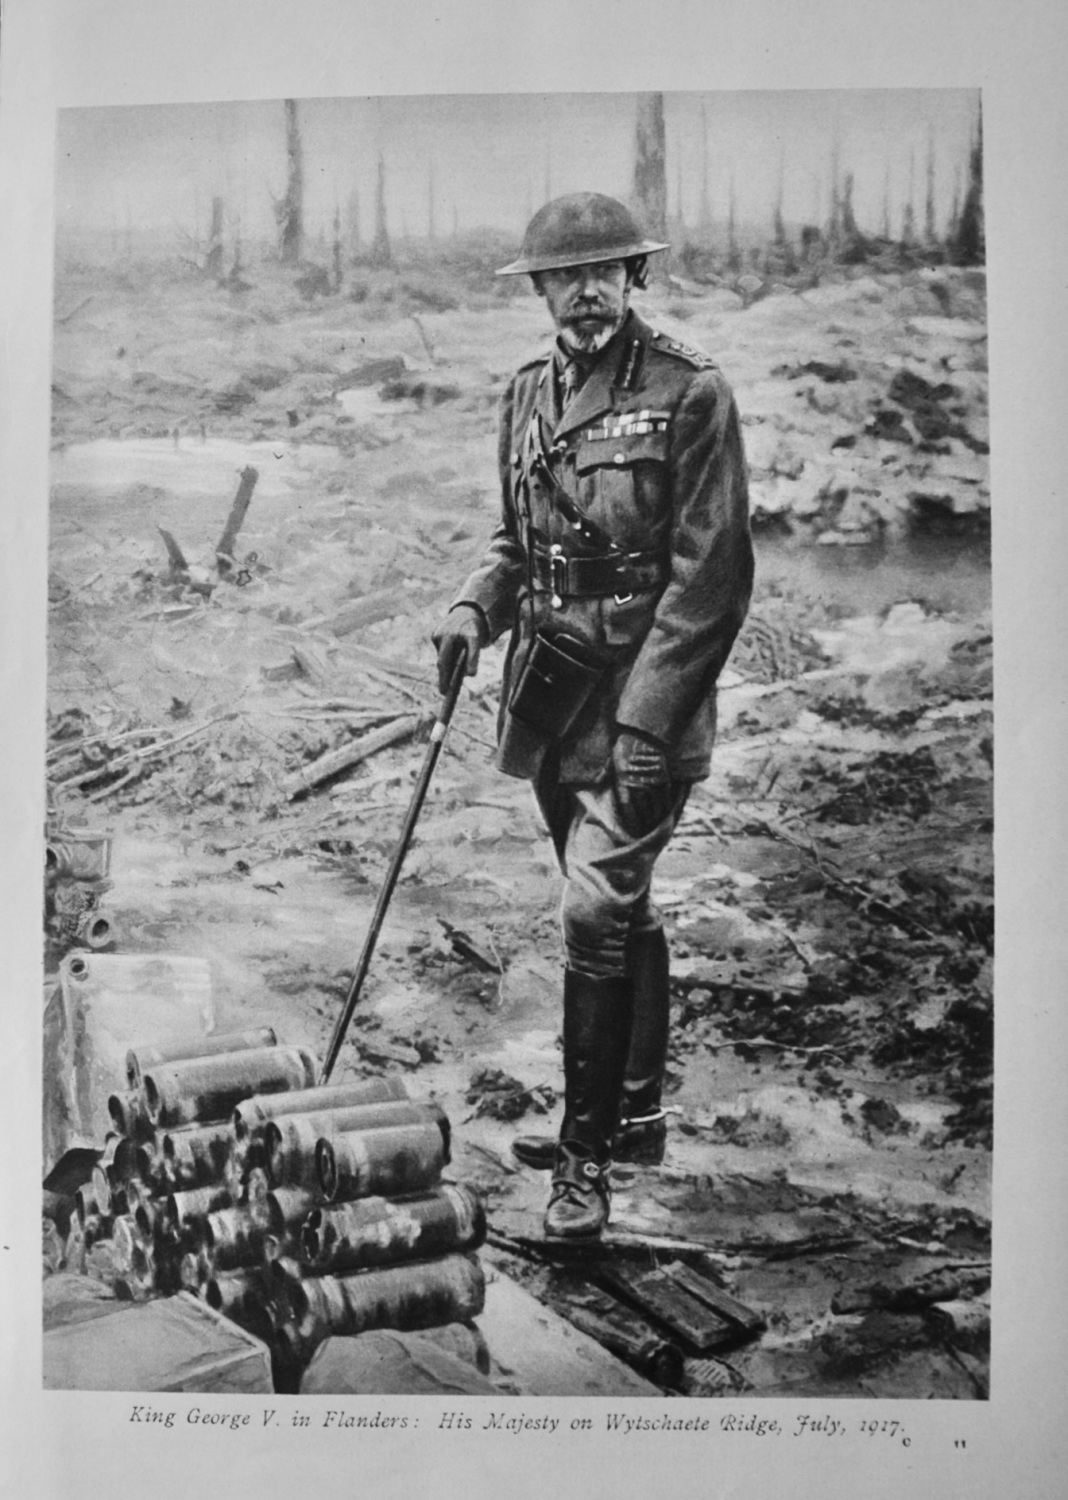 King George V. in Flanders :  His Majesty on Wytschaete Ridge, July, 1917.